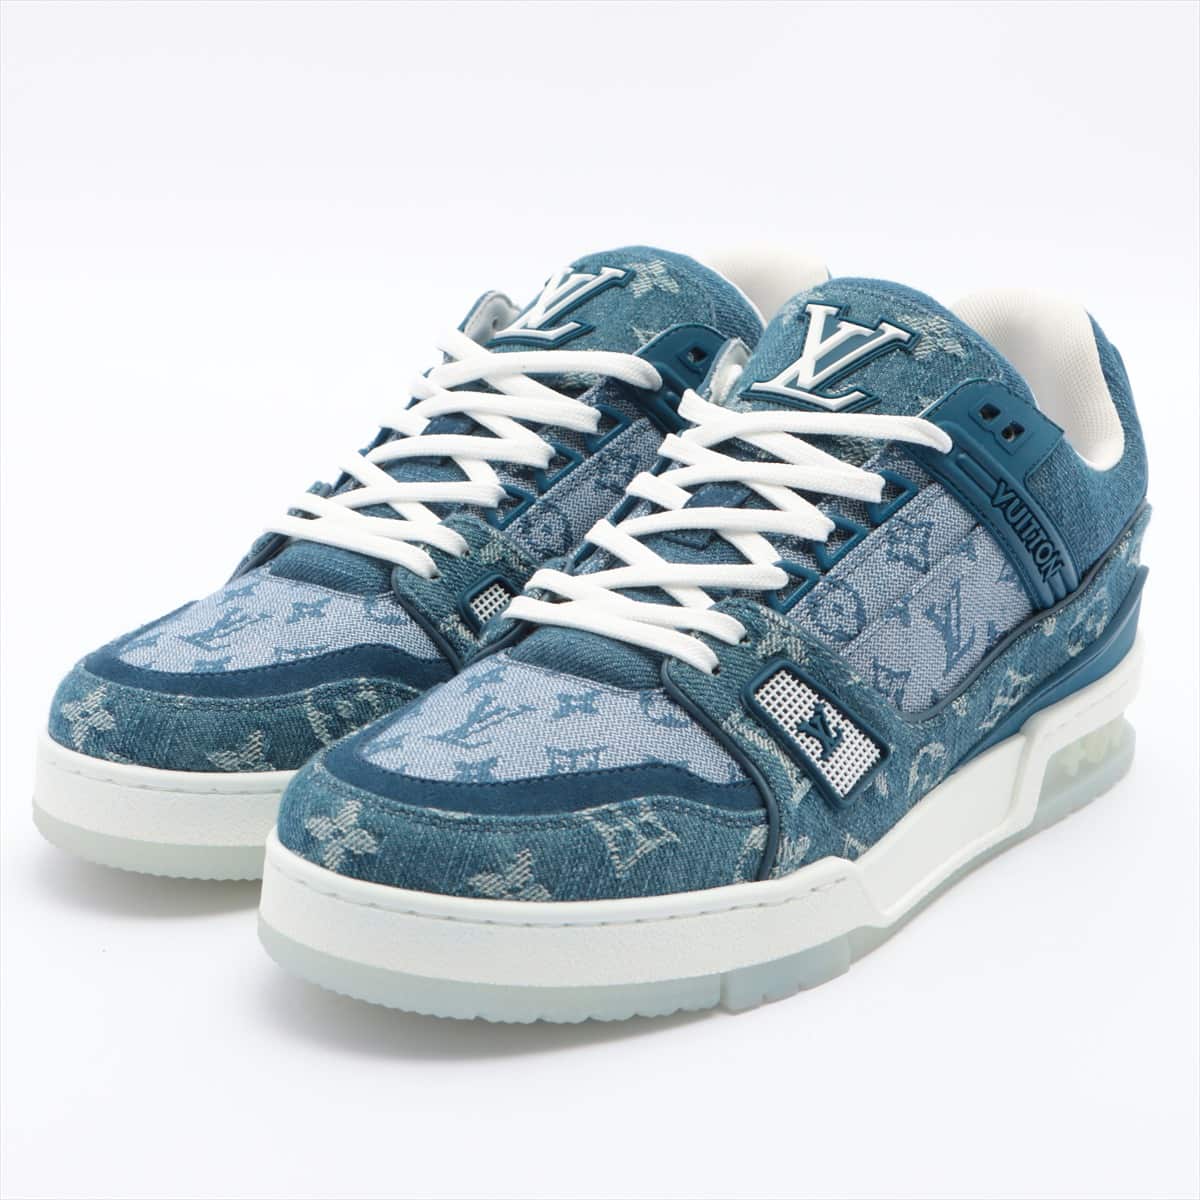 Trainers｜Page 66ALLU UK｜The Home of Pre-Loved Luxury Fashion